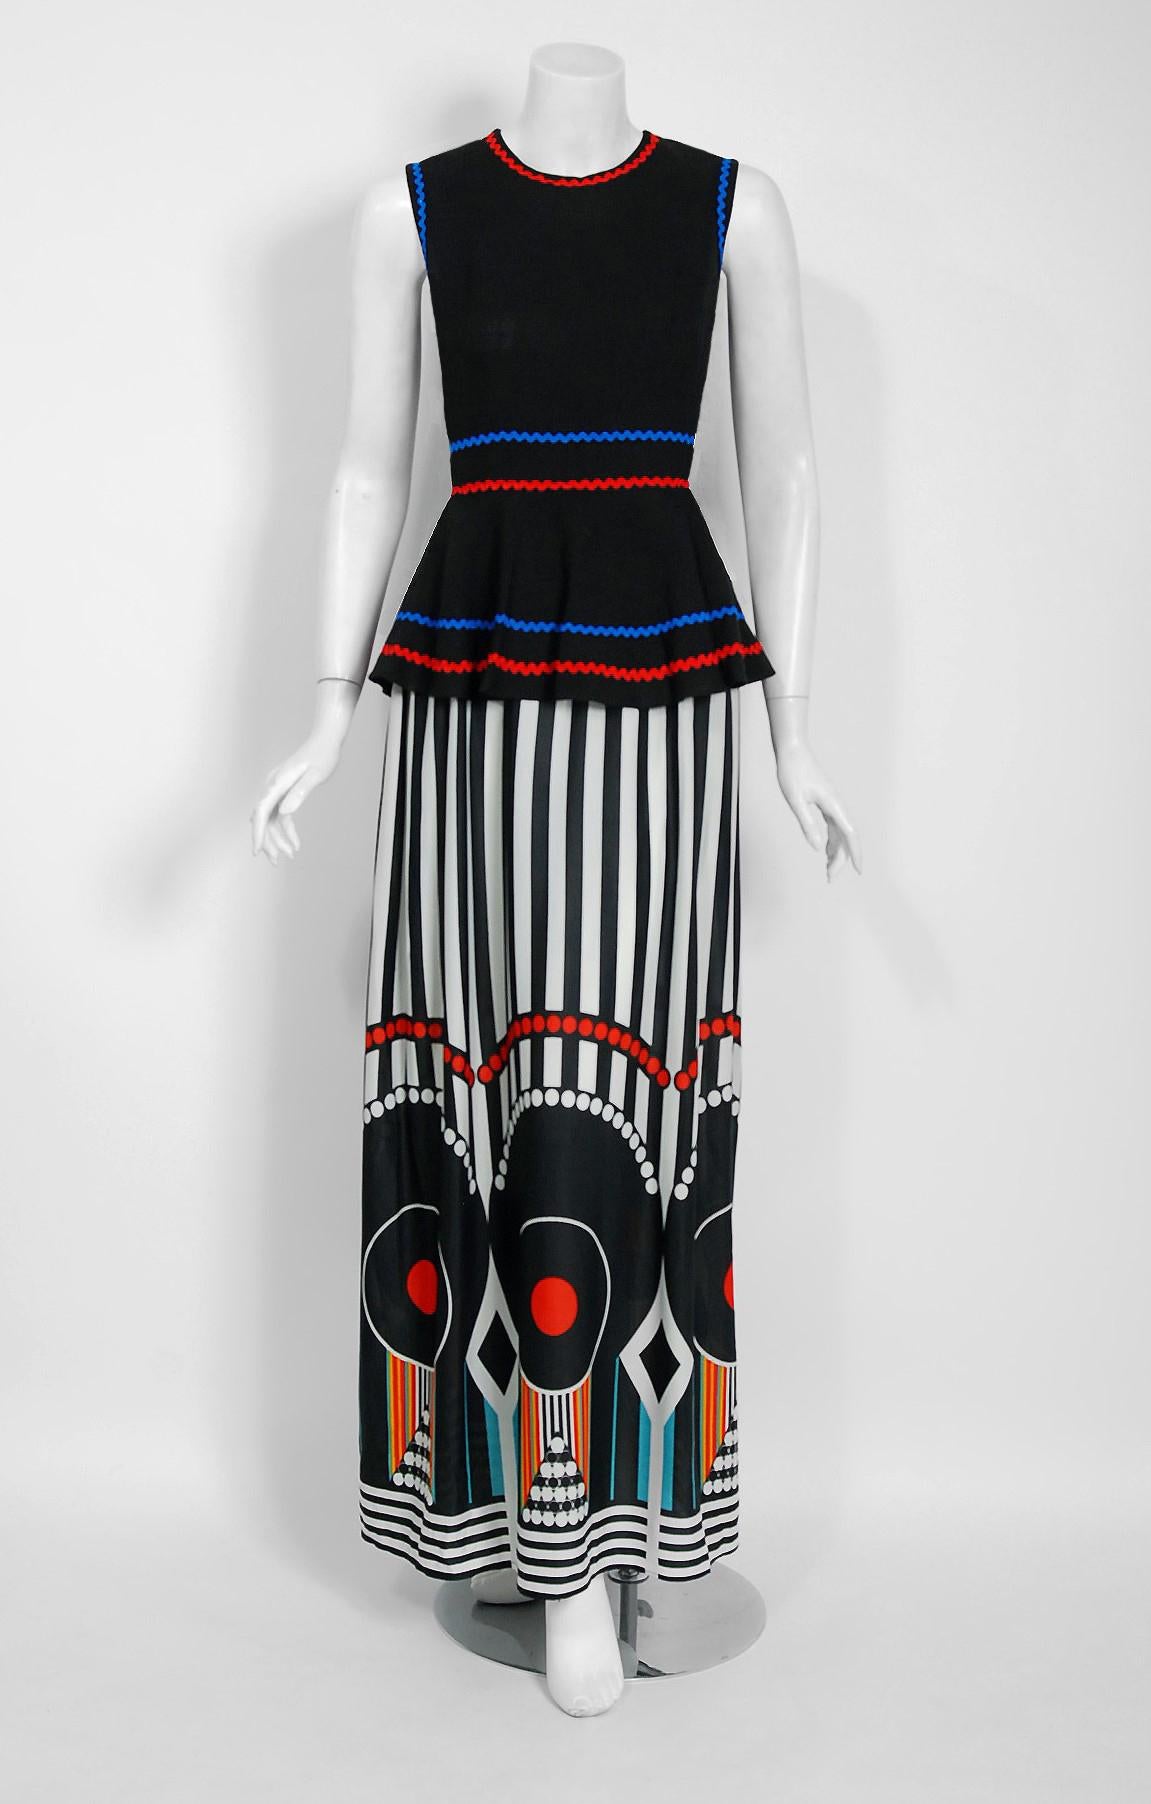 Breathtaking spring-summer 1970 documented black linen and colorful op-art print jersey dress by the famous Jean Varon label. John Bates started the Jean Varon label in 1960 and is possibly one of the greatest forgotten talents of this era. With no